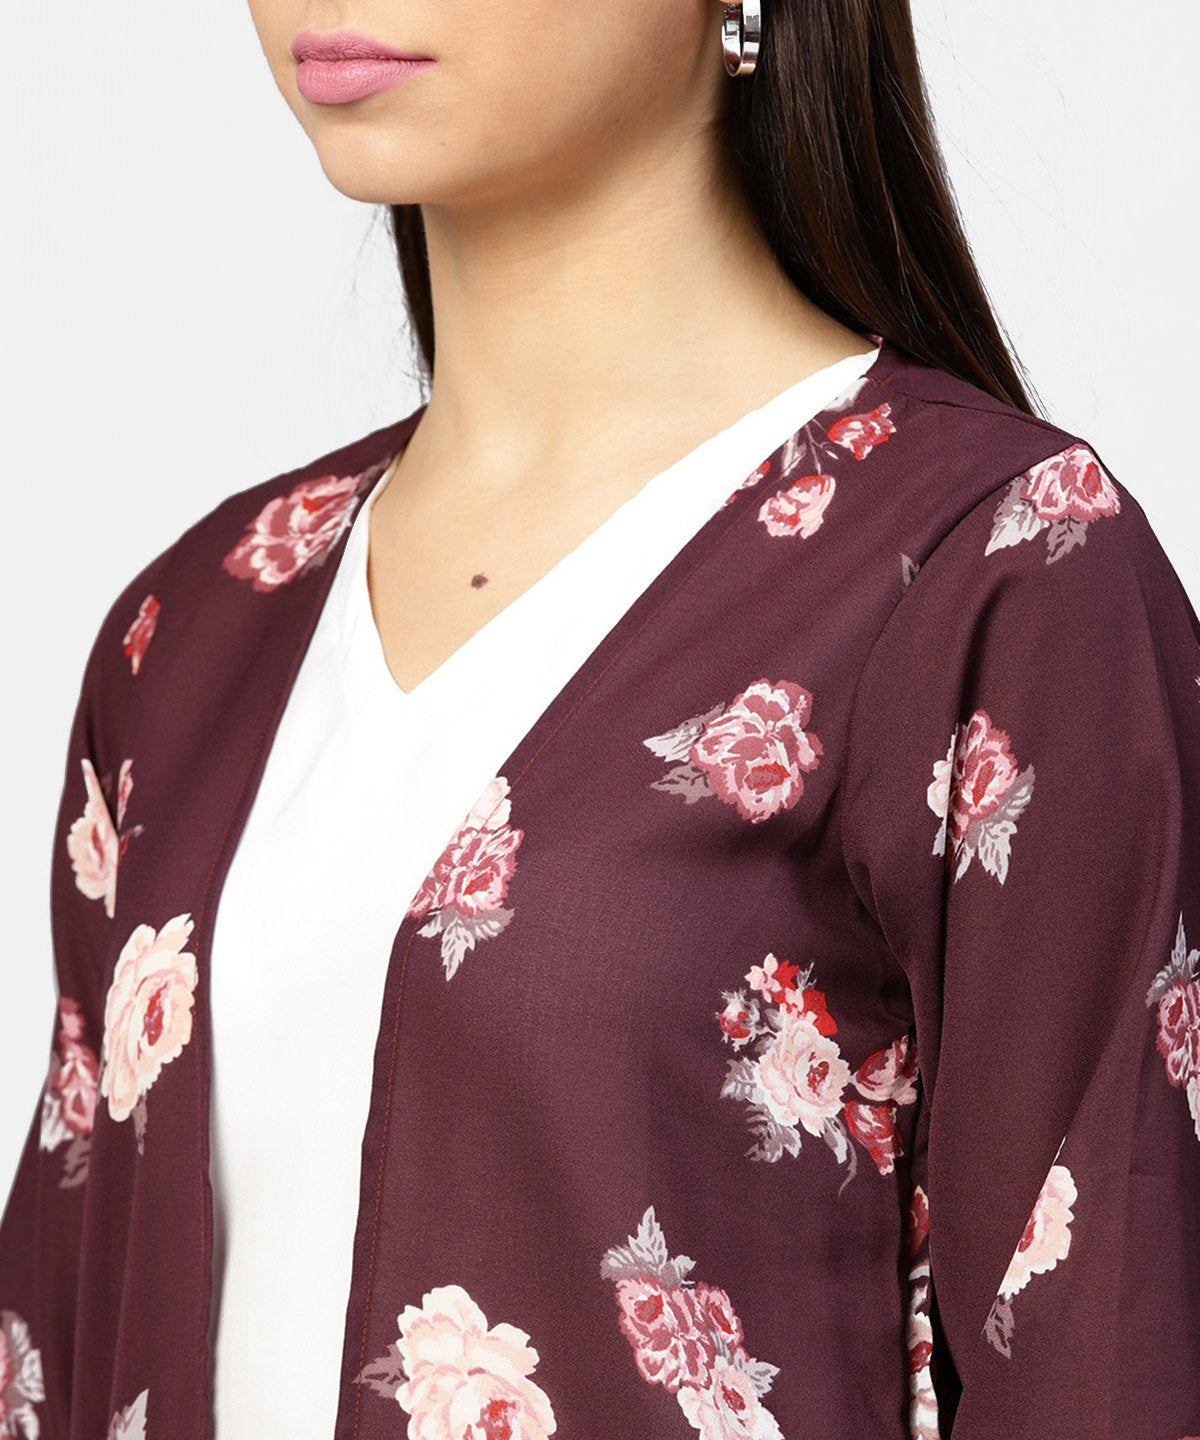 Women's Solid V-Neck Cream Top With Floral Printed Loose-Fit 3/4Th Sleeves Open Style Cape - Nayo Clothing